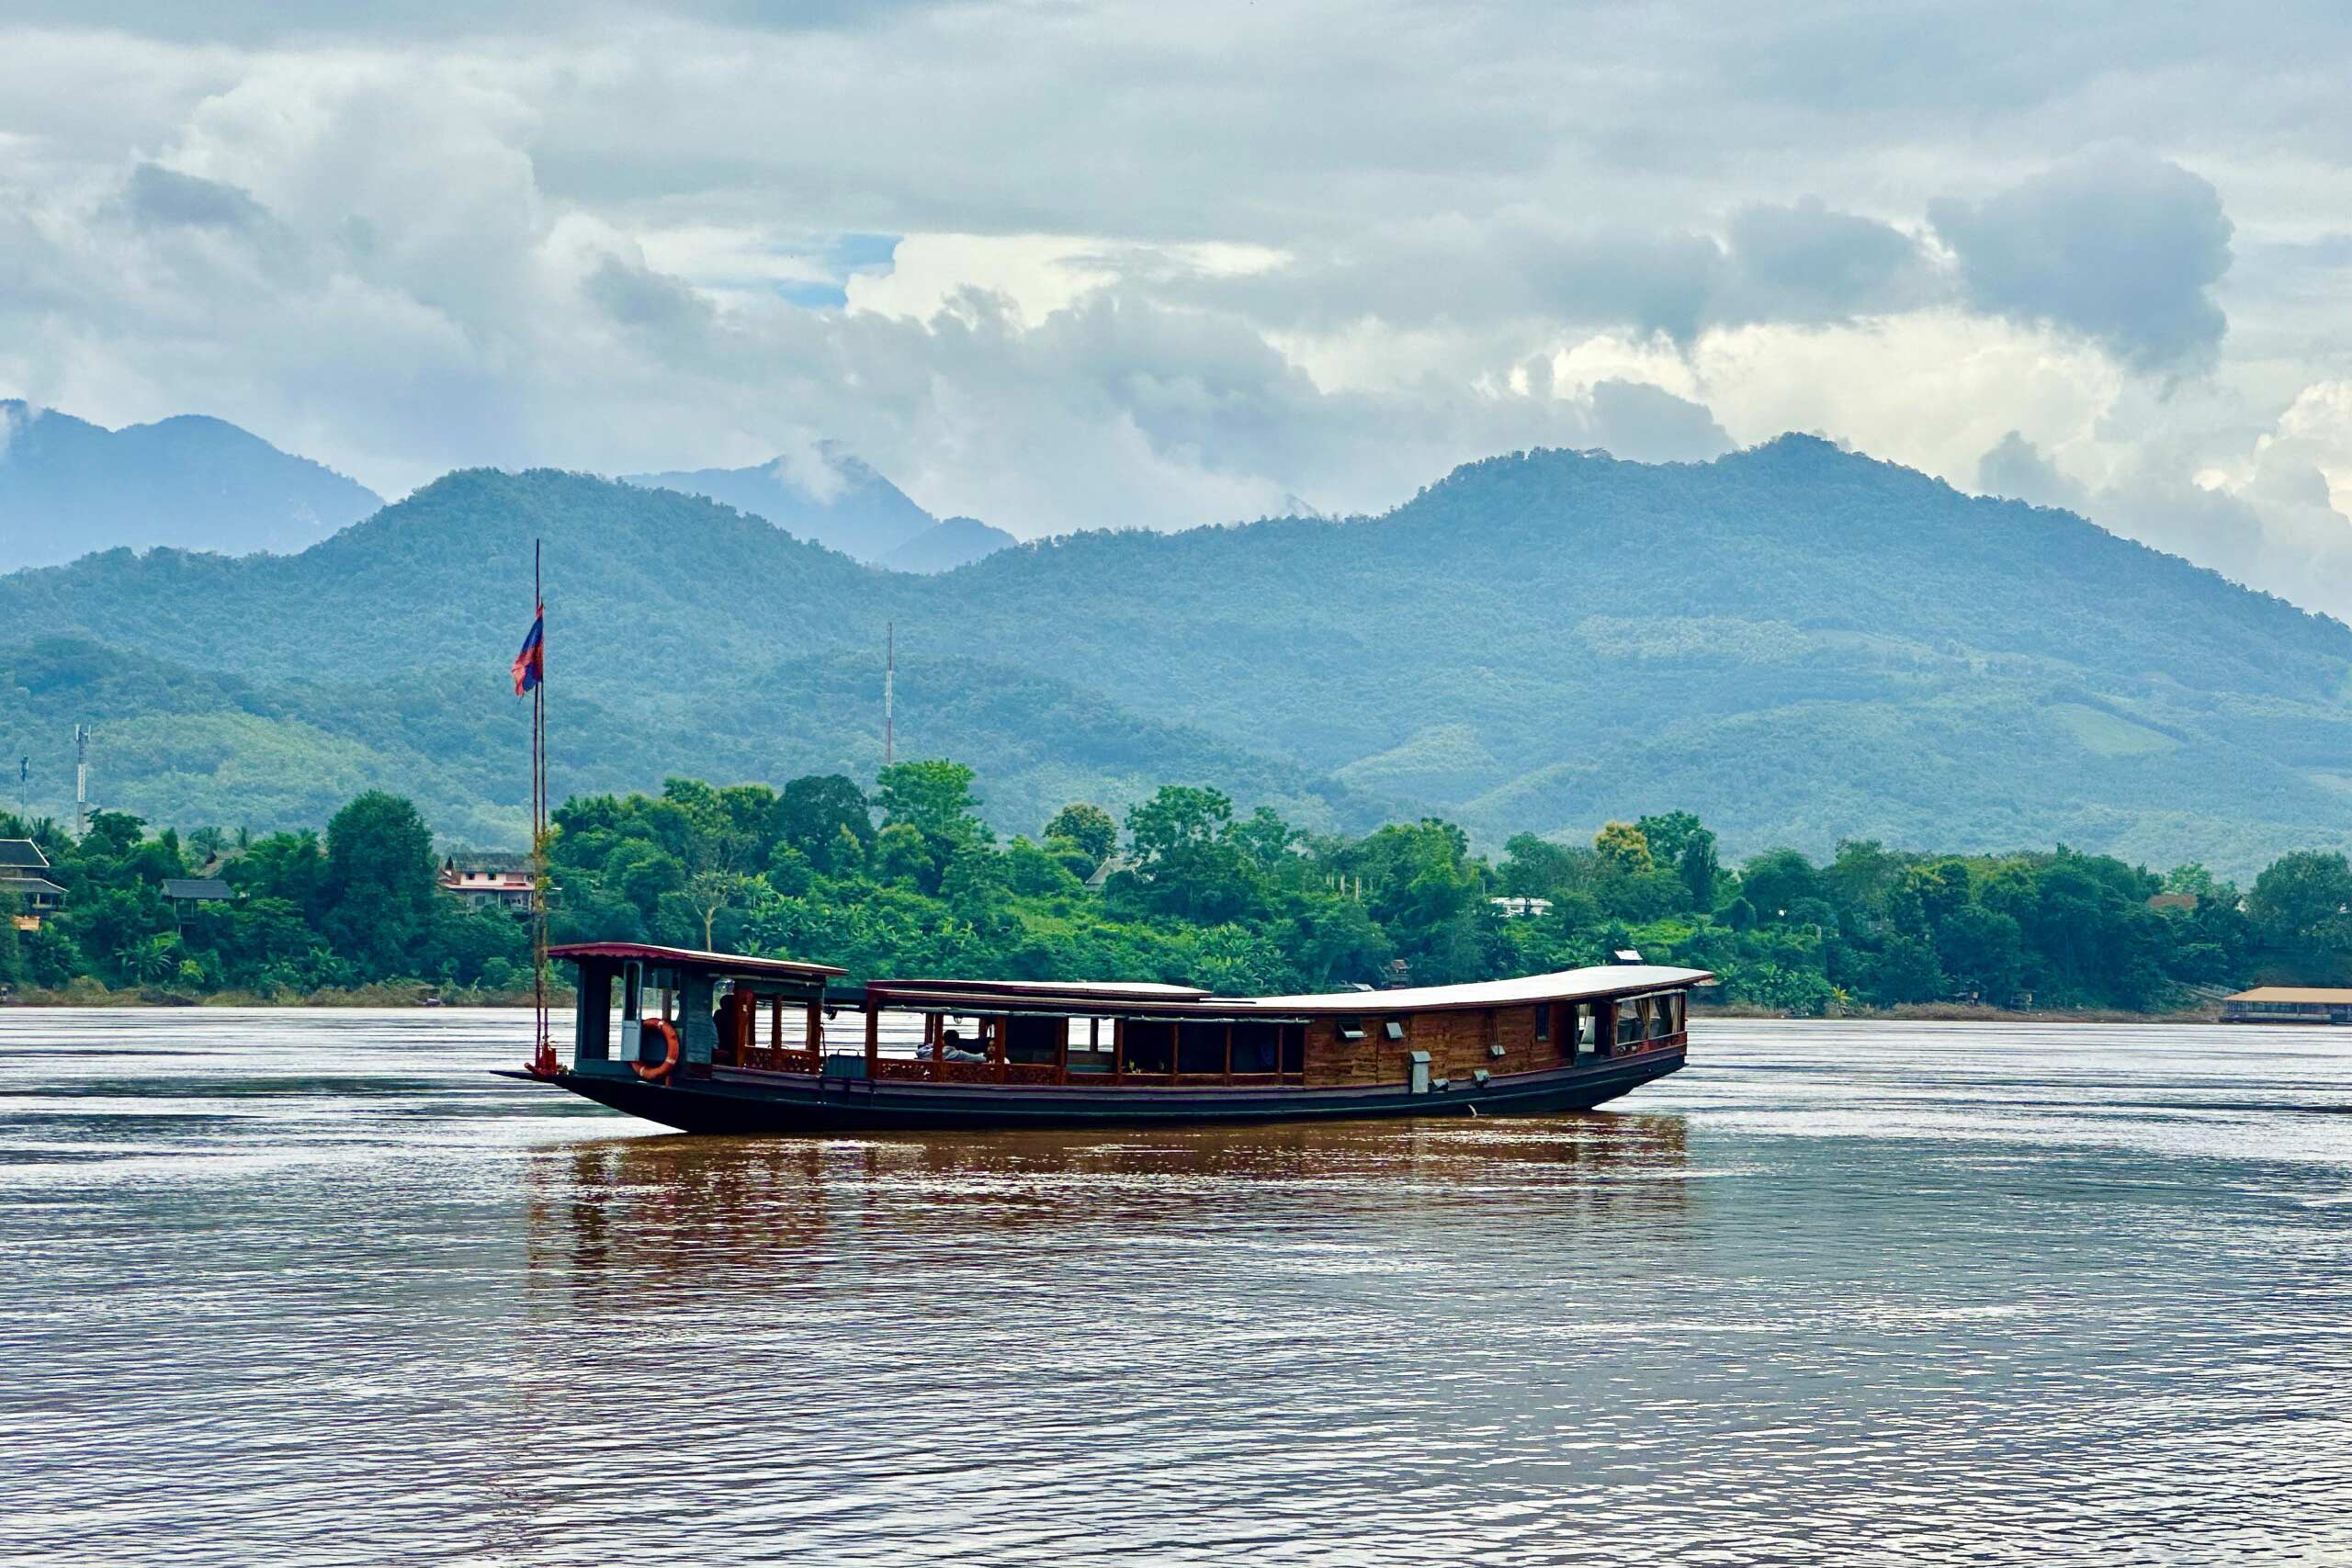 A Luang Prabang riverboat with mountains in the background.